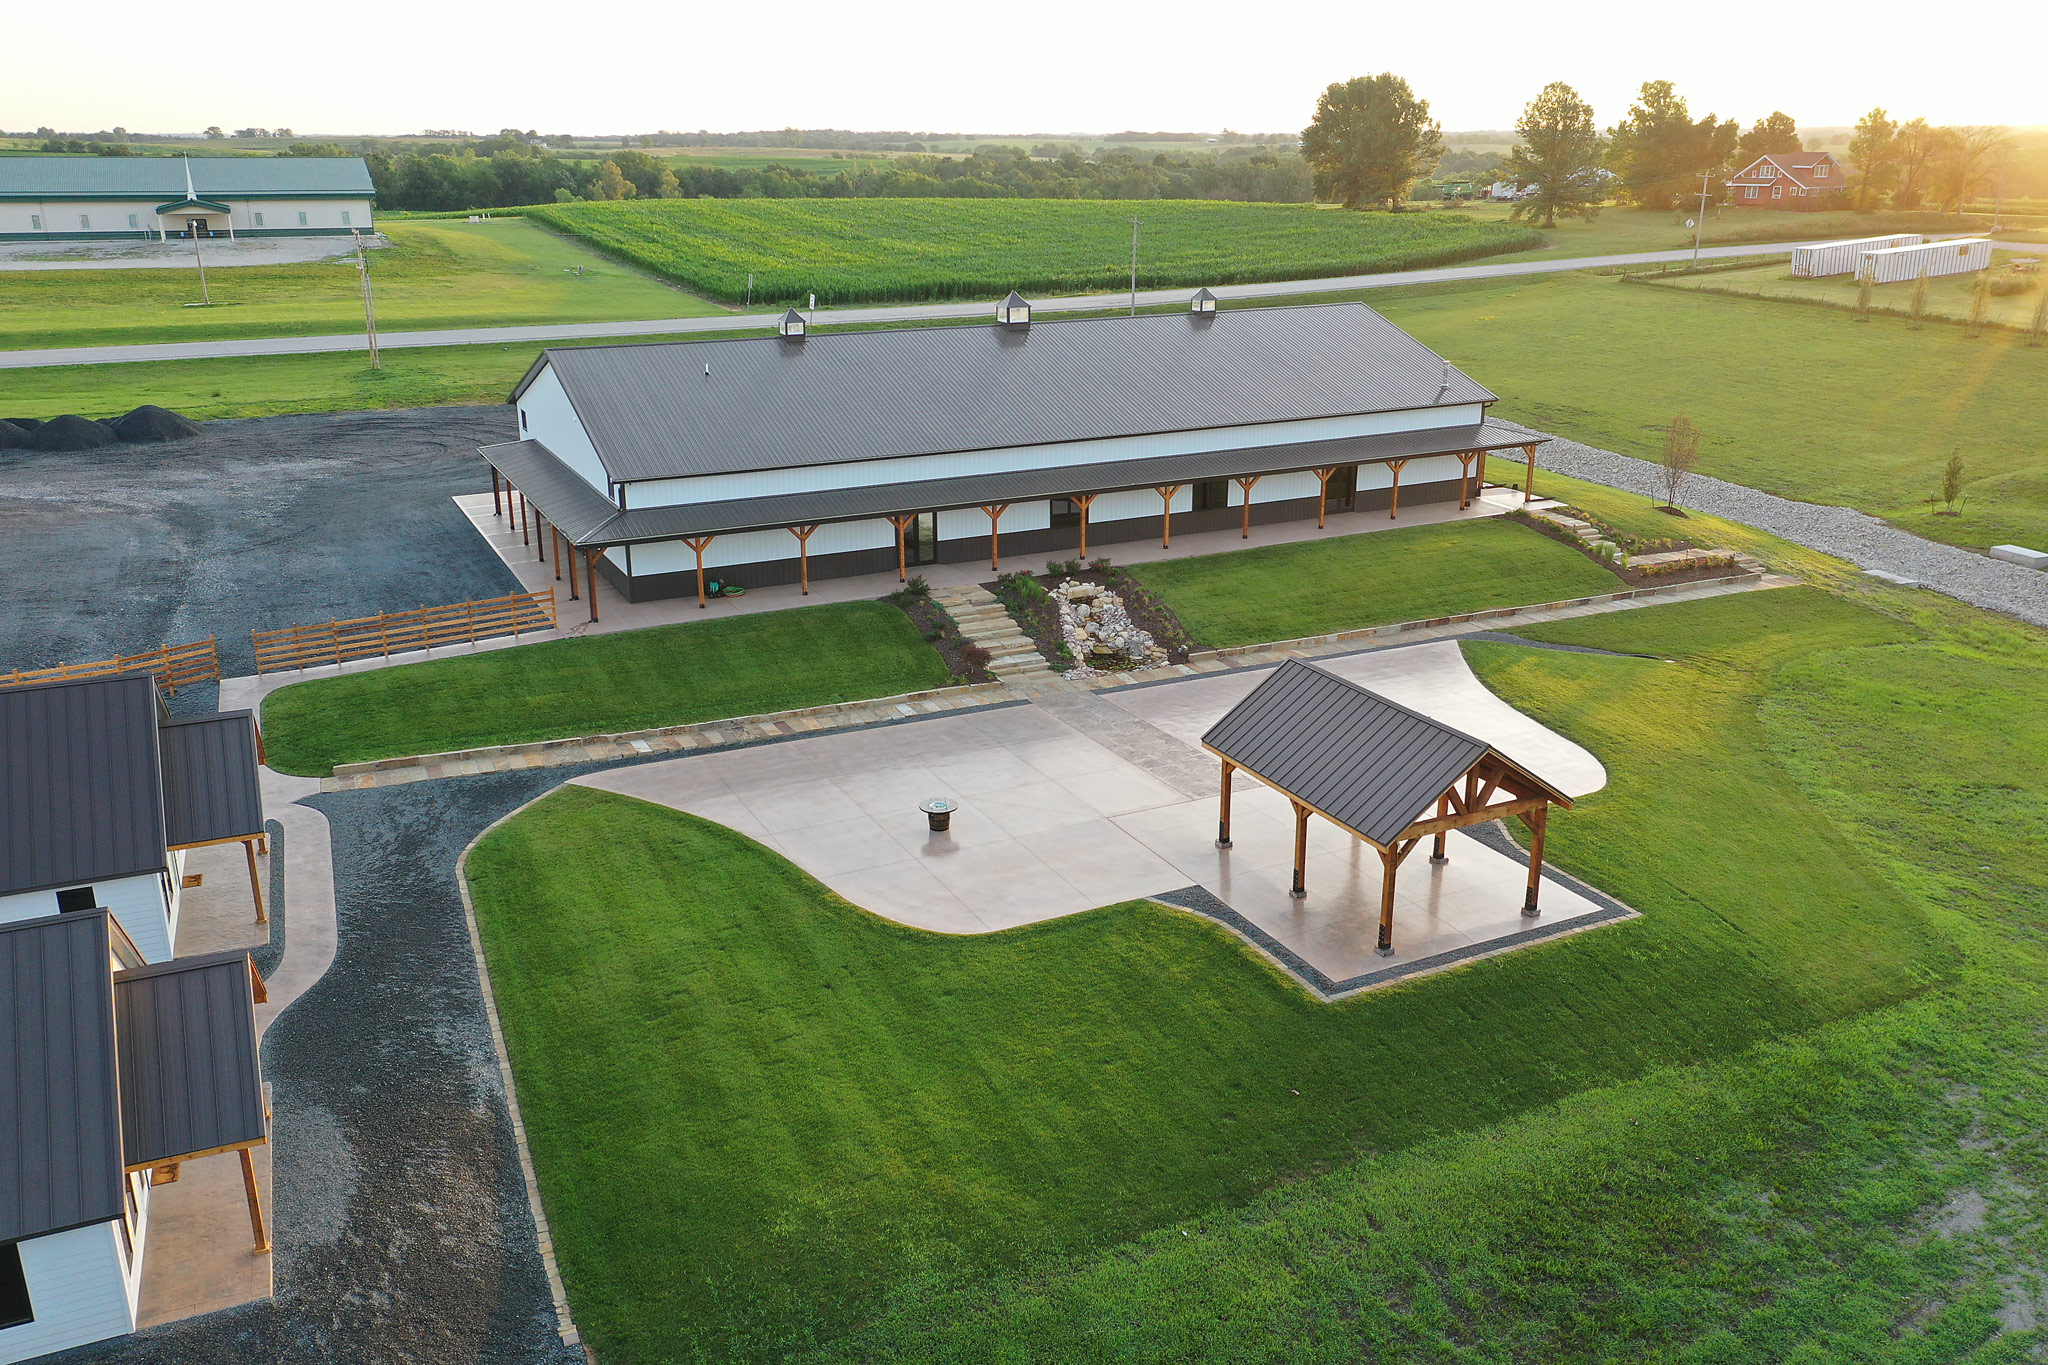 Aerial photo of The VeNue Event Space showing the outdoor Courtyard with covered pavilion. There is a corn field in the distance.